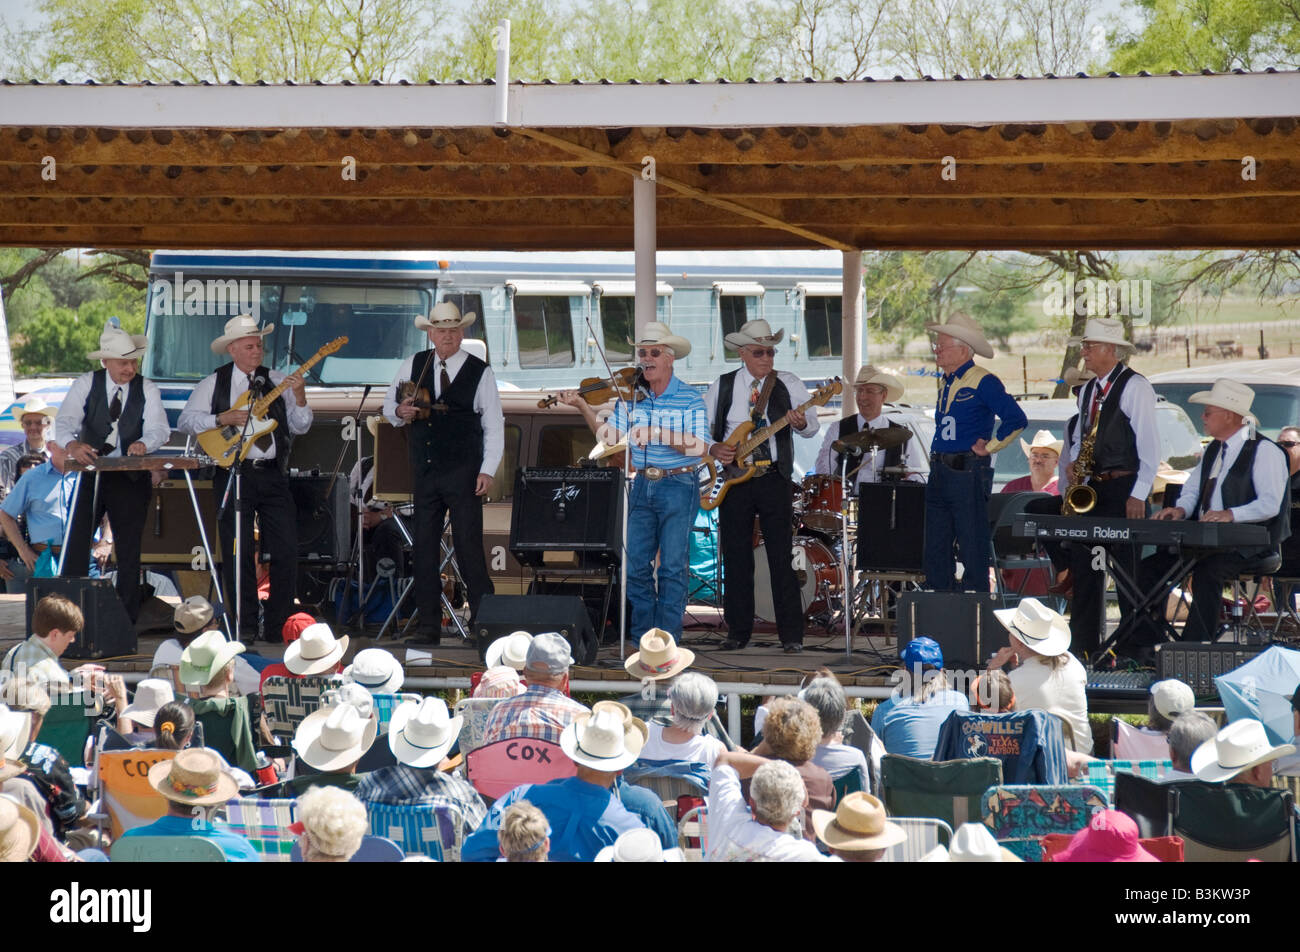 Texas Turkey annual Bob Wills Day celebration Texas Playboys western swing band concert guest appearance by Jody Nix on fiddle Stock Photo